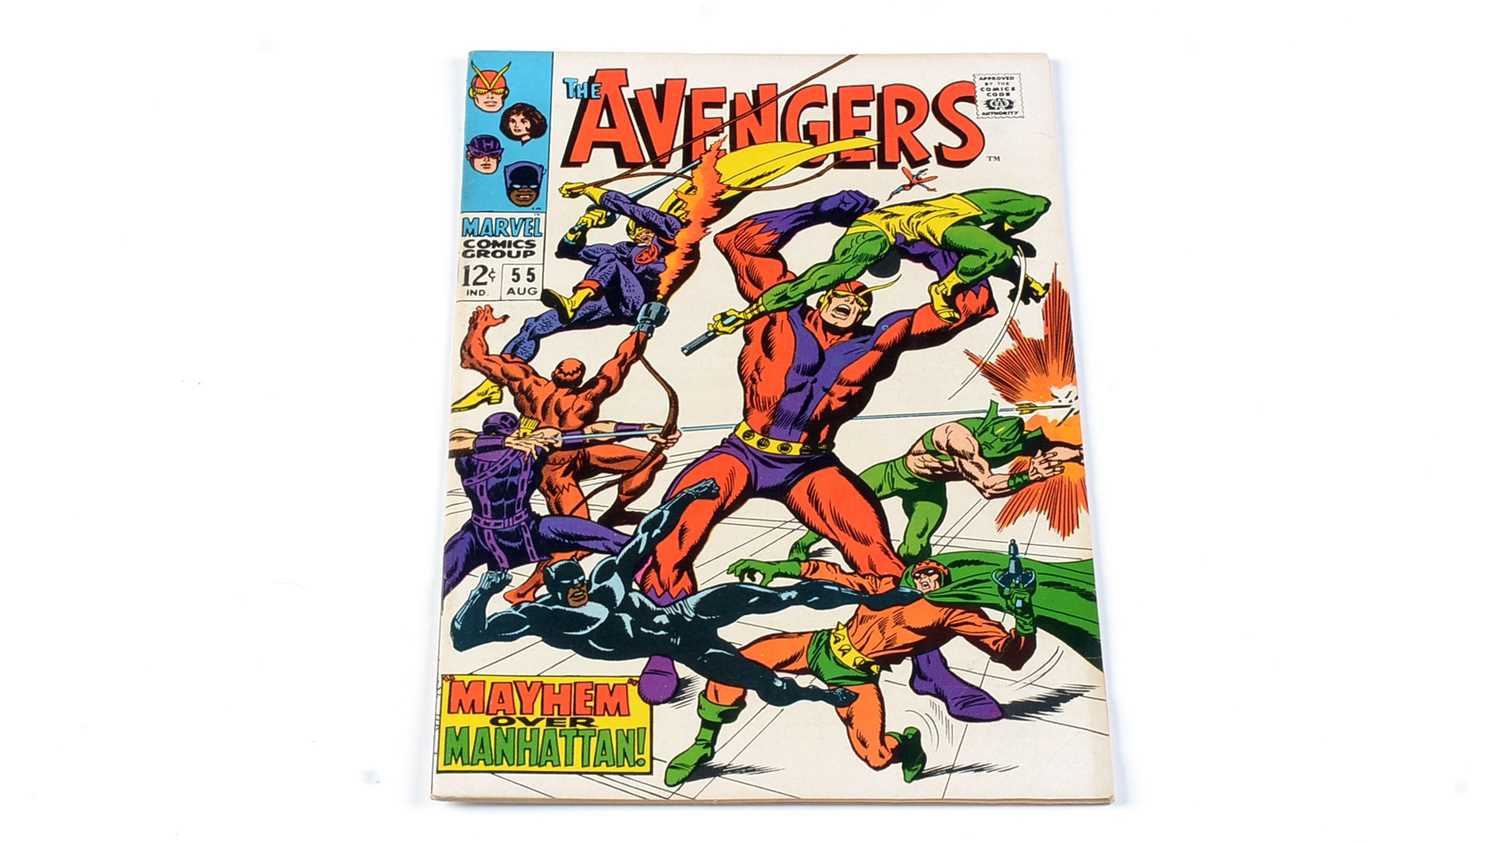 The Avengers by Marvel Comics